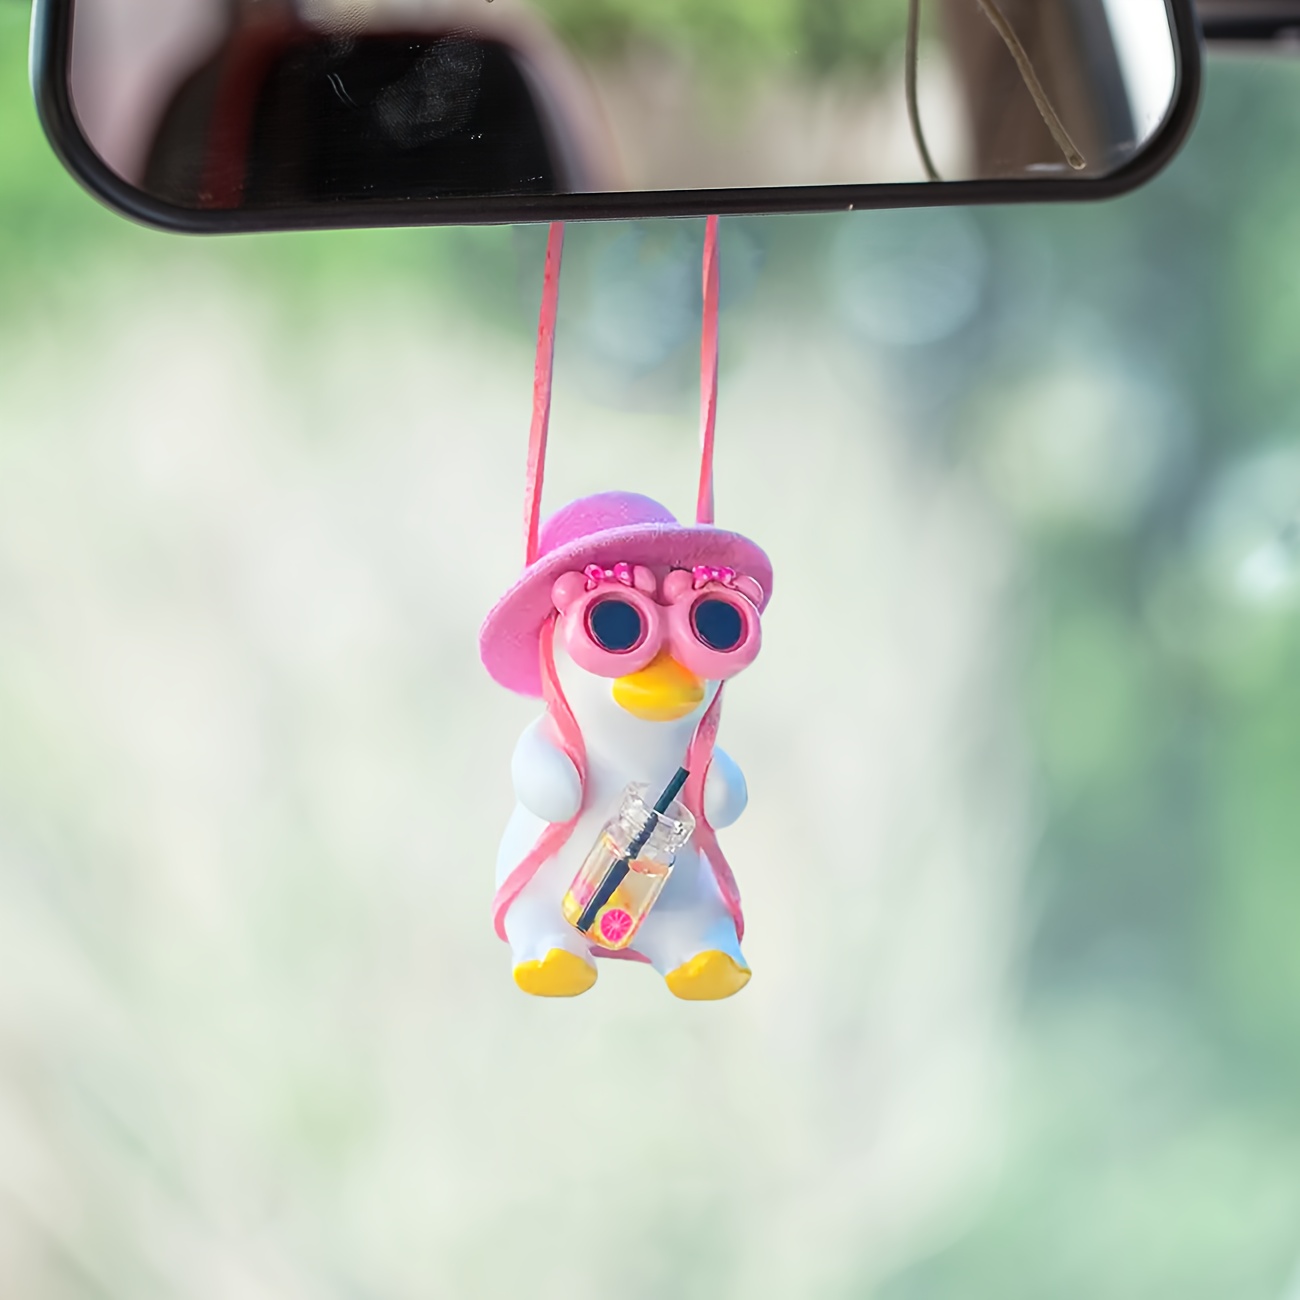 img.kwcdn.com/product/hanging-accessories-car-pend